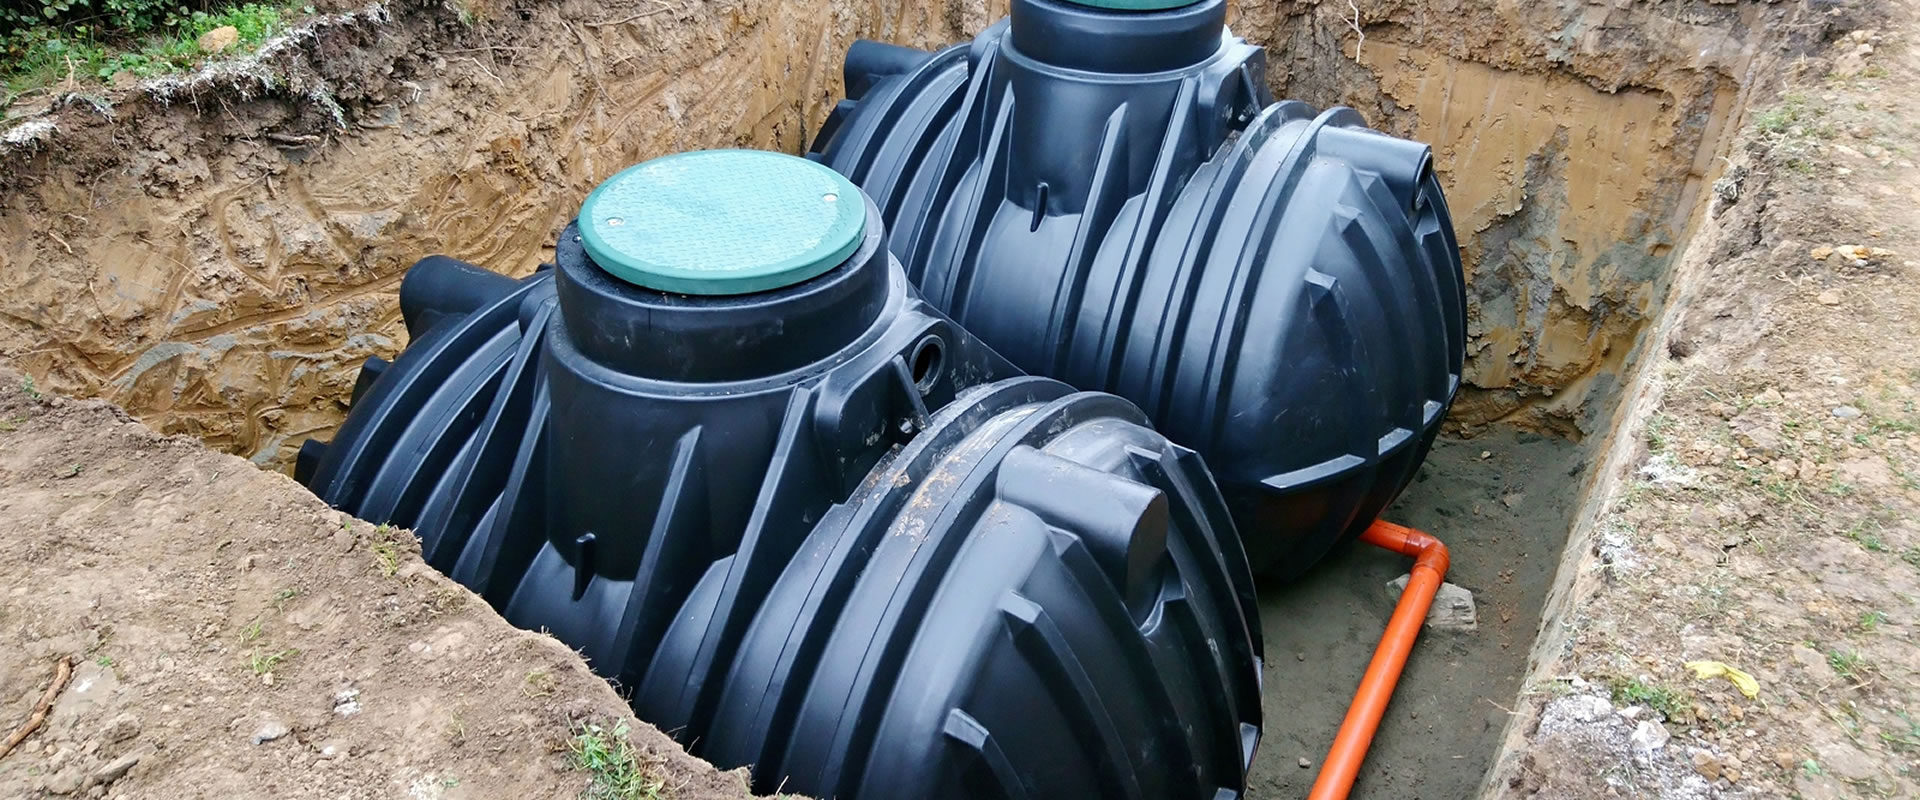 Septic Tank Cleaning Raleigh